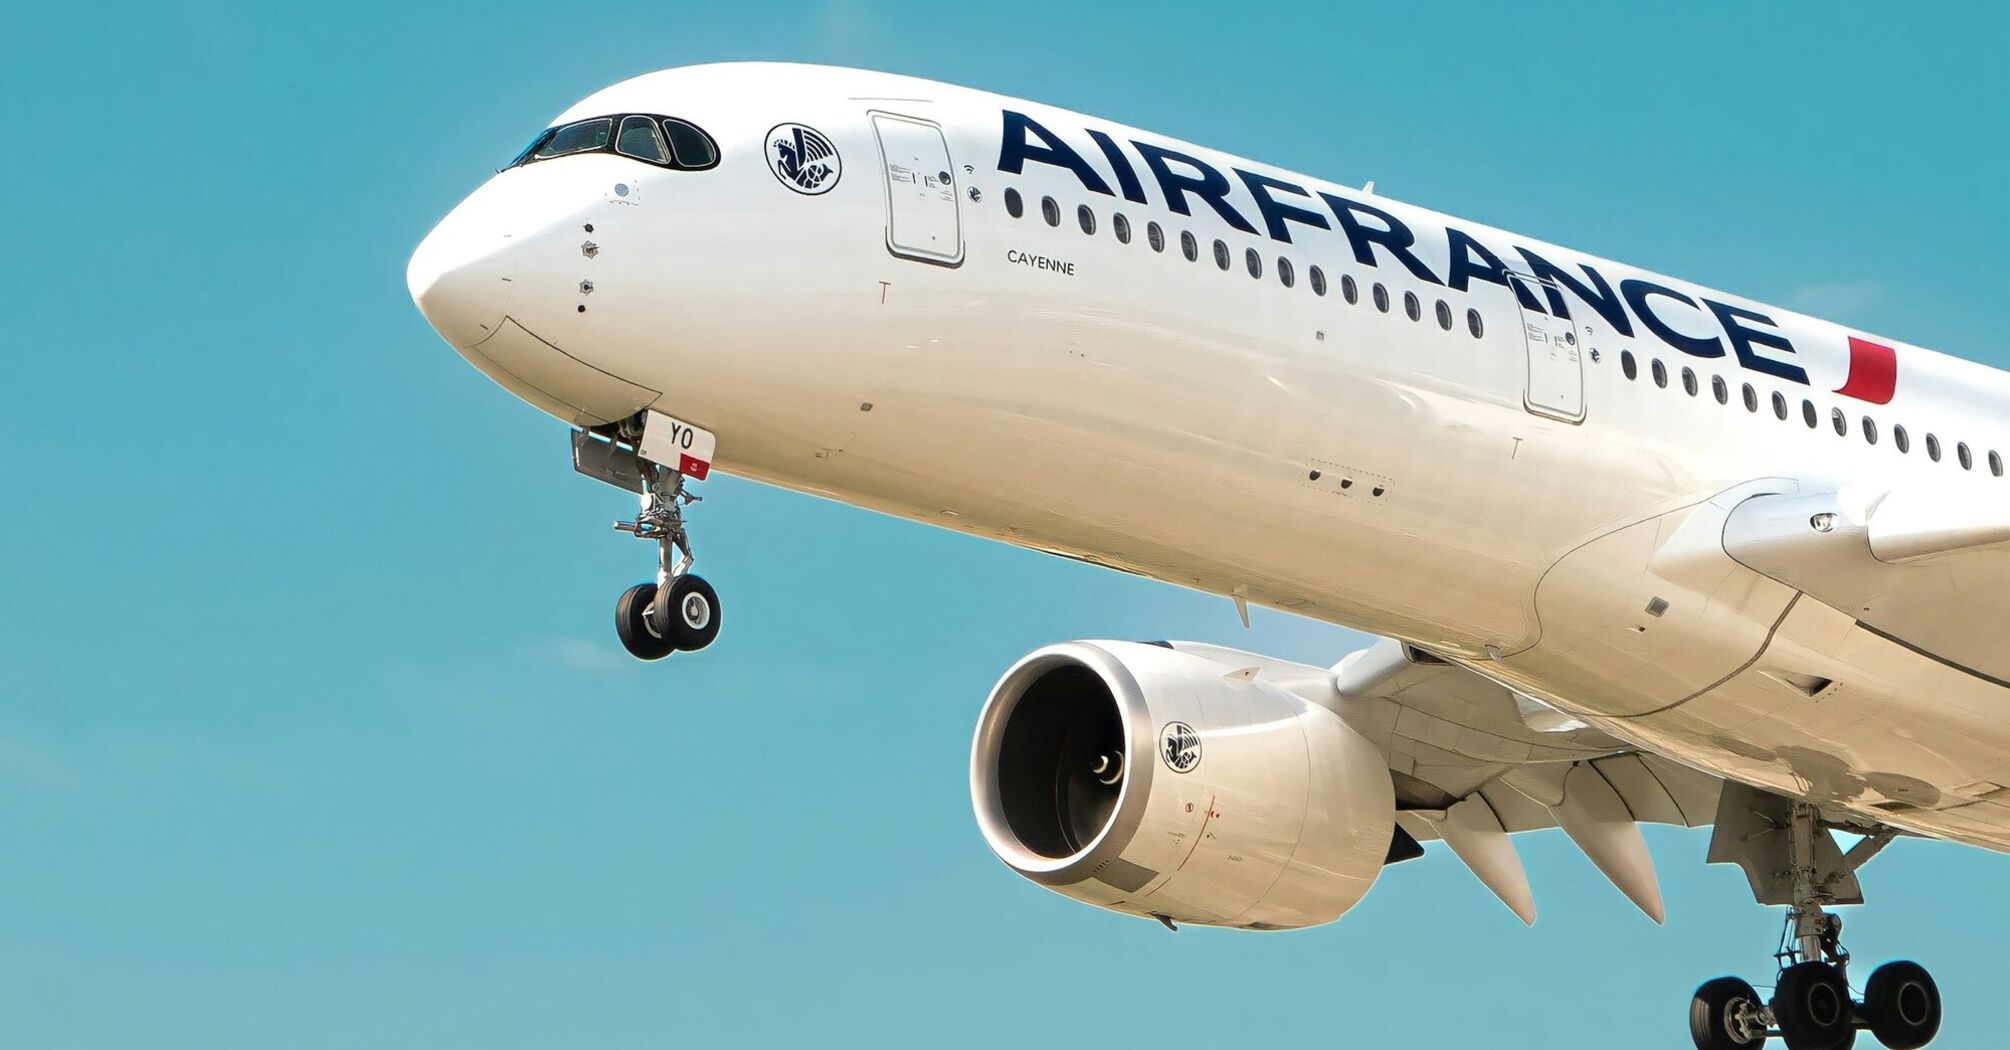 Air France airplane in flight with landing gear extended